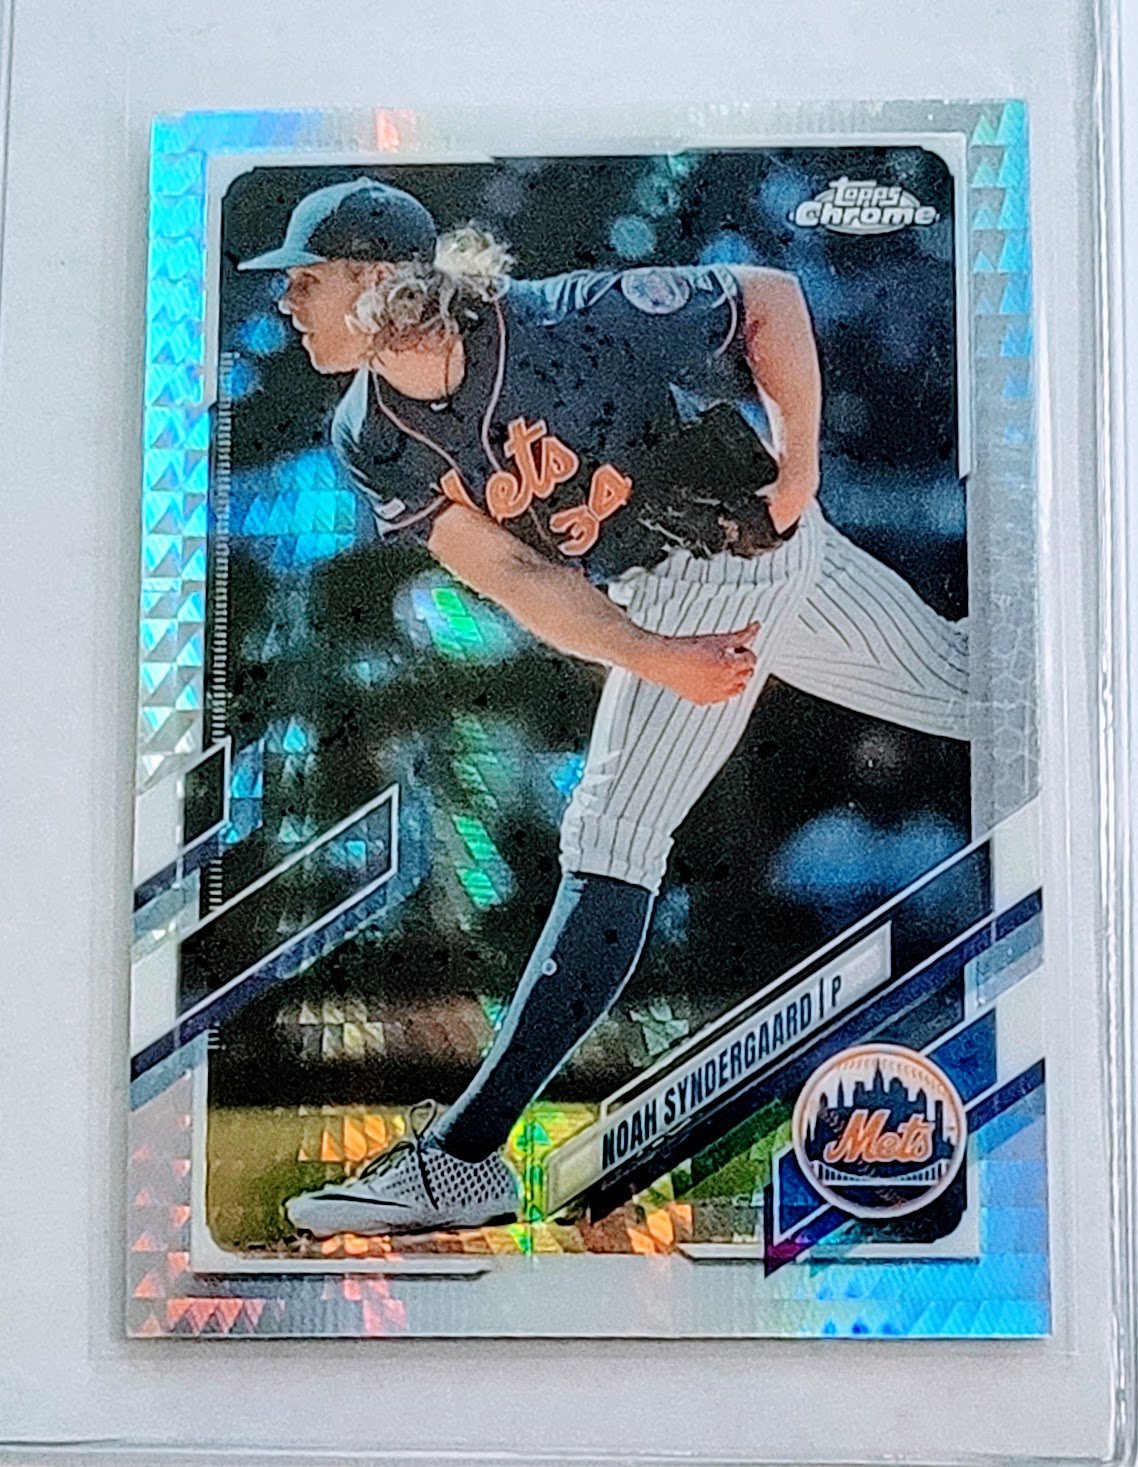 2021 Topps Chrome Noah Syndergaard Prism Refractor Baseball Card TPTV simple Xclusive Collectibles   